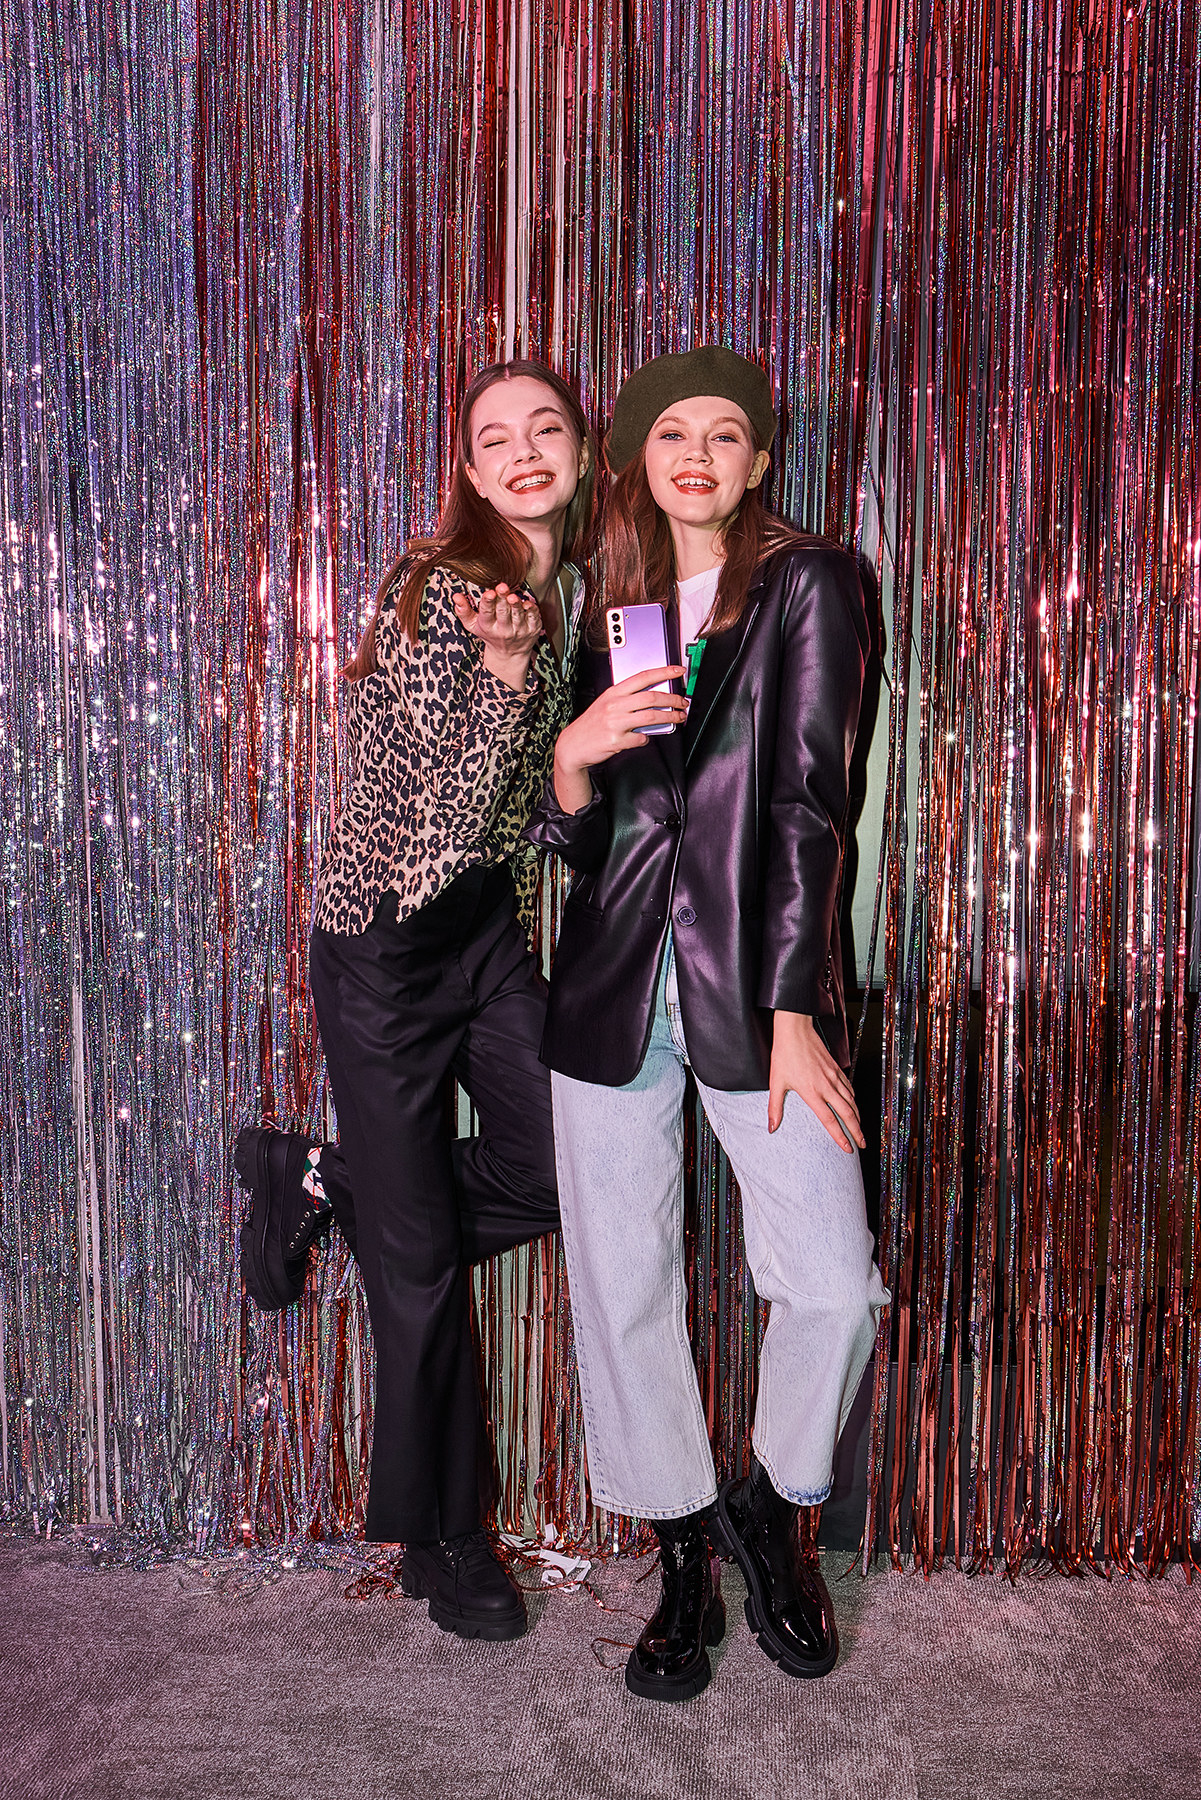 Two women standing in front of a shimmering tinfoil backdrop holding a phone and posing.